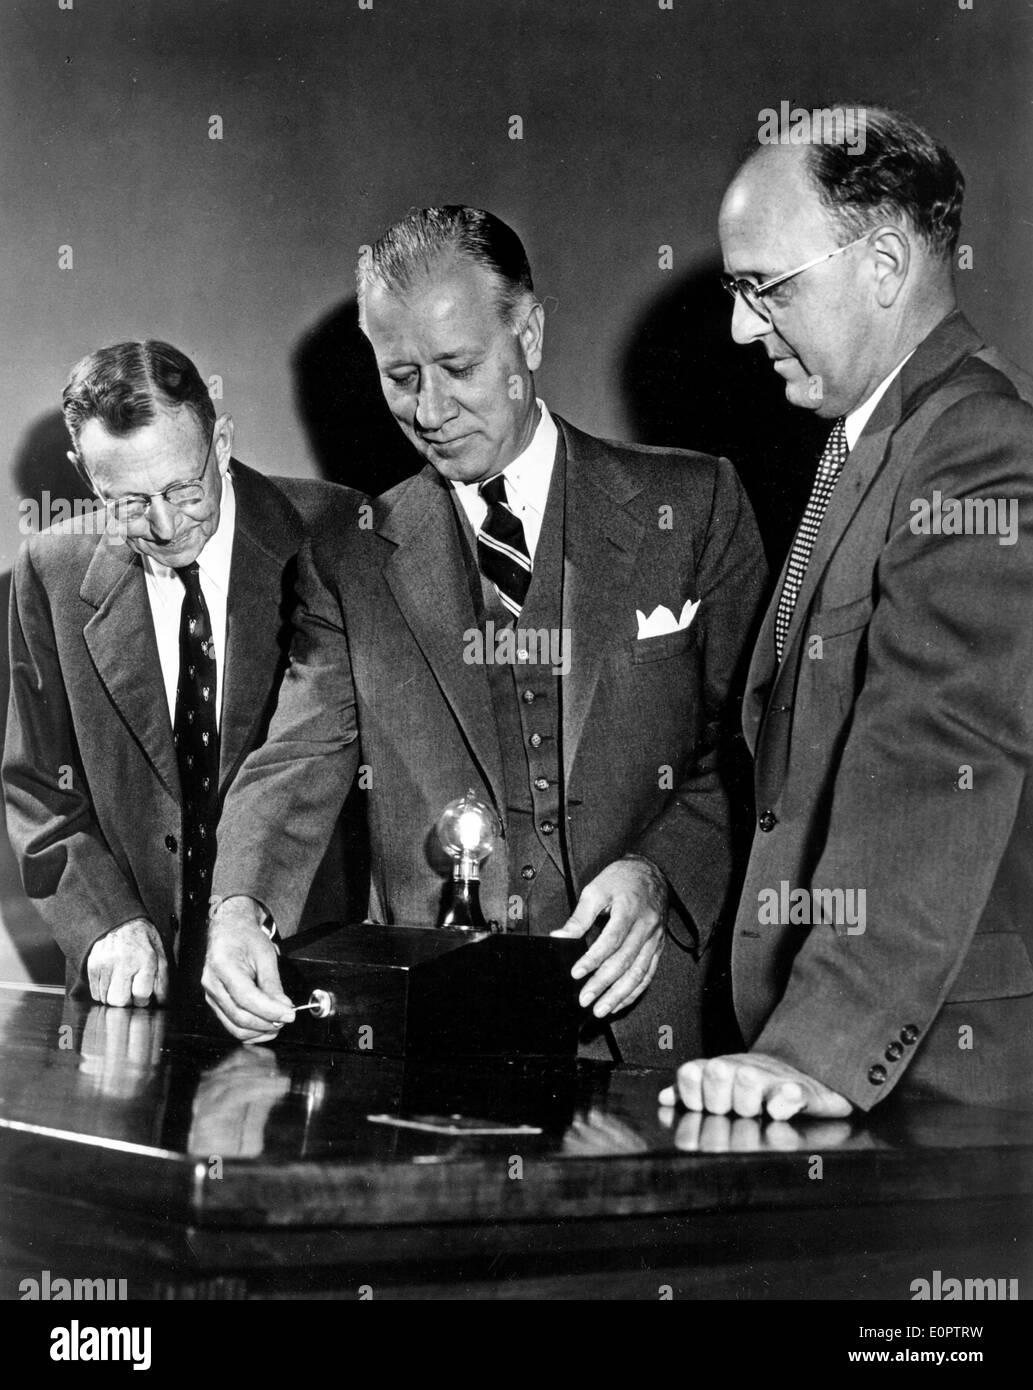 Jan 01, 1957 - Schenectedy, New York, USA - (File Photo, c1957) From left, Dr. WILLIAM COOLIDGE, director-emeritus of research at GE; RALPH J. CORDINER, GE President GE; and Dr. GUY SUITS, GE VP and director of research; light a incandescent bulb designed to last 100-years that will burn continuously on Thomas Edison's desk in General Electric's headquarters. Stock Photo